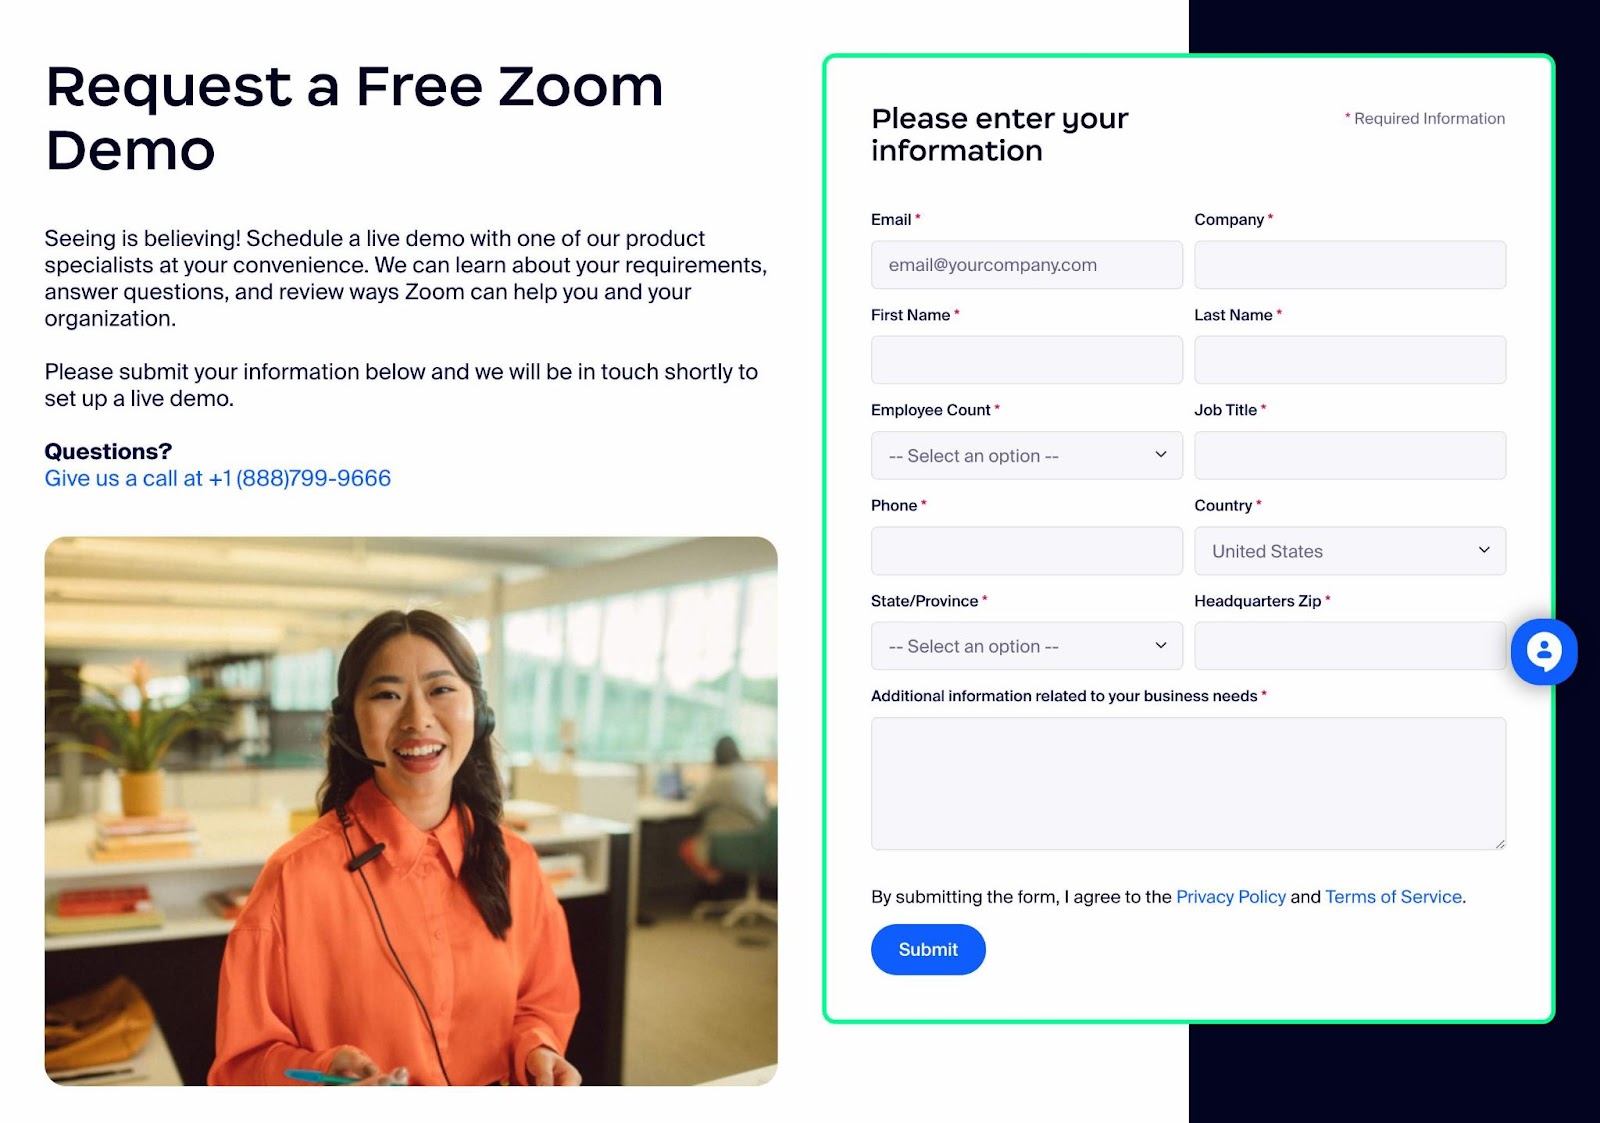 "Request a Free Zoom Demo" form